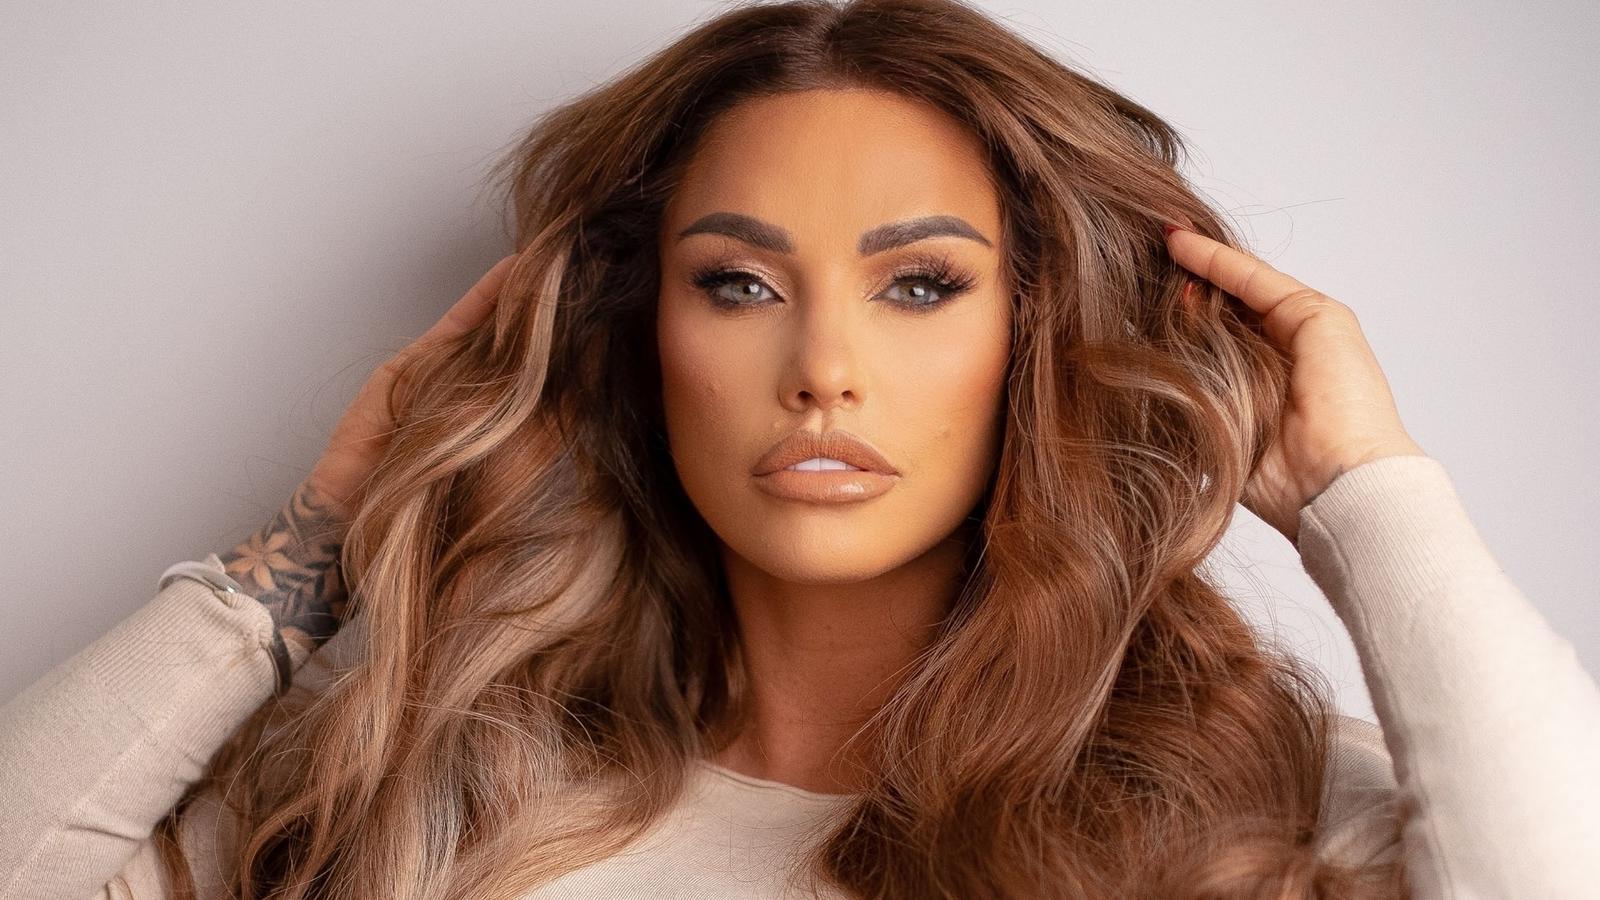 SONDERKONDITIONEN: MINDESTHONORAR: BGUK_2541407 - UK, UNITED KINGDOM - *EXCLUSIVE* -   British Glamour Model Katie Price stuns in photoshoot for her new ambassadorship with unique hair! The star looked sensational with her brown locks as Katie has al